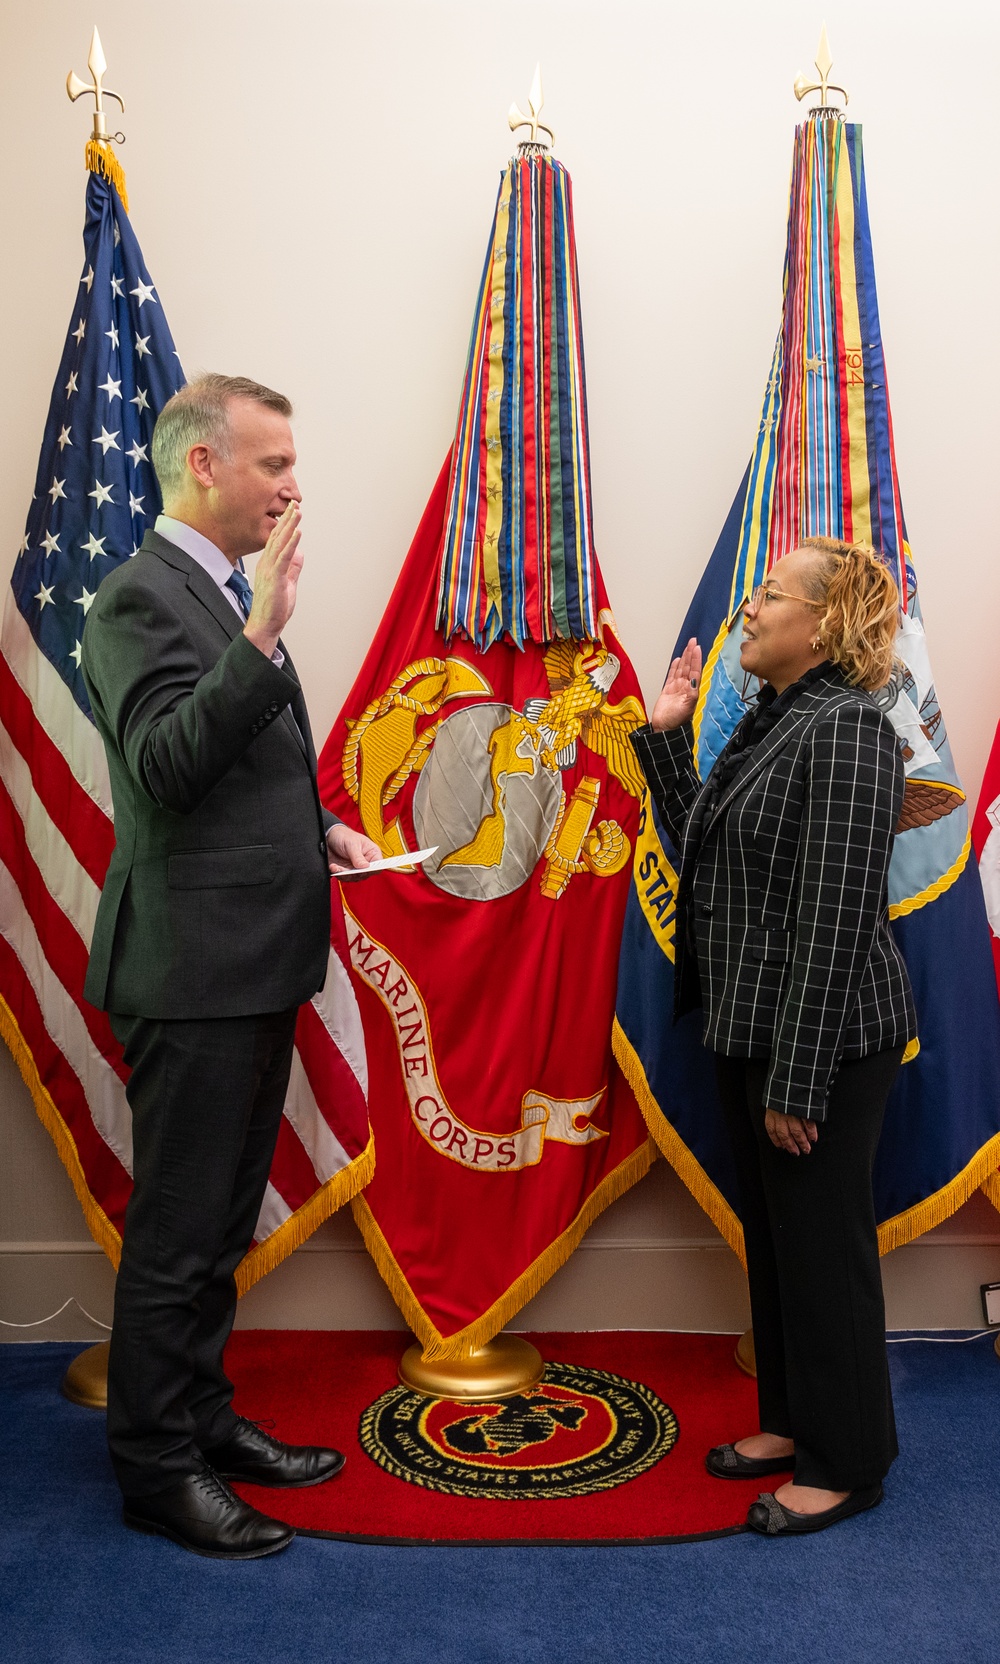 Under Secretary of the Navy administers the oath of office to Ms. Arveice Washington